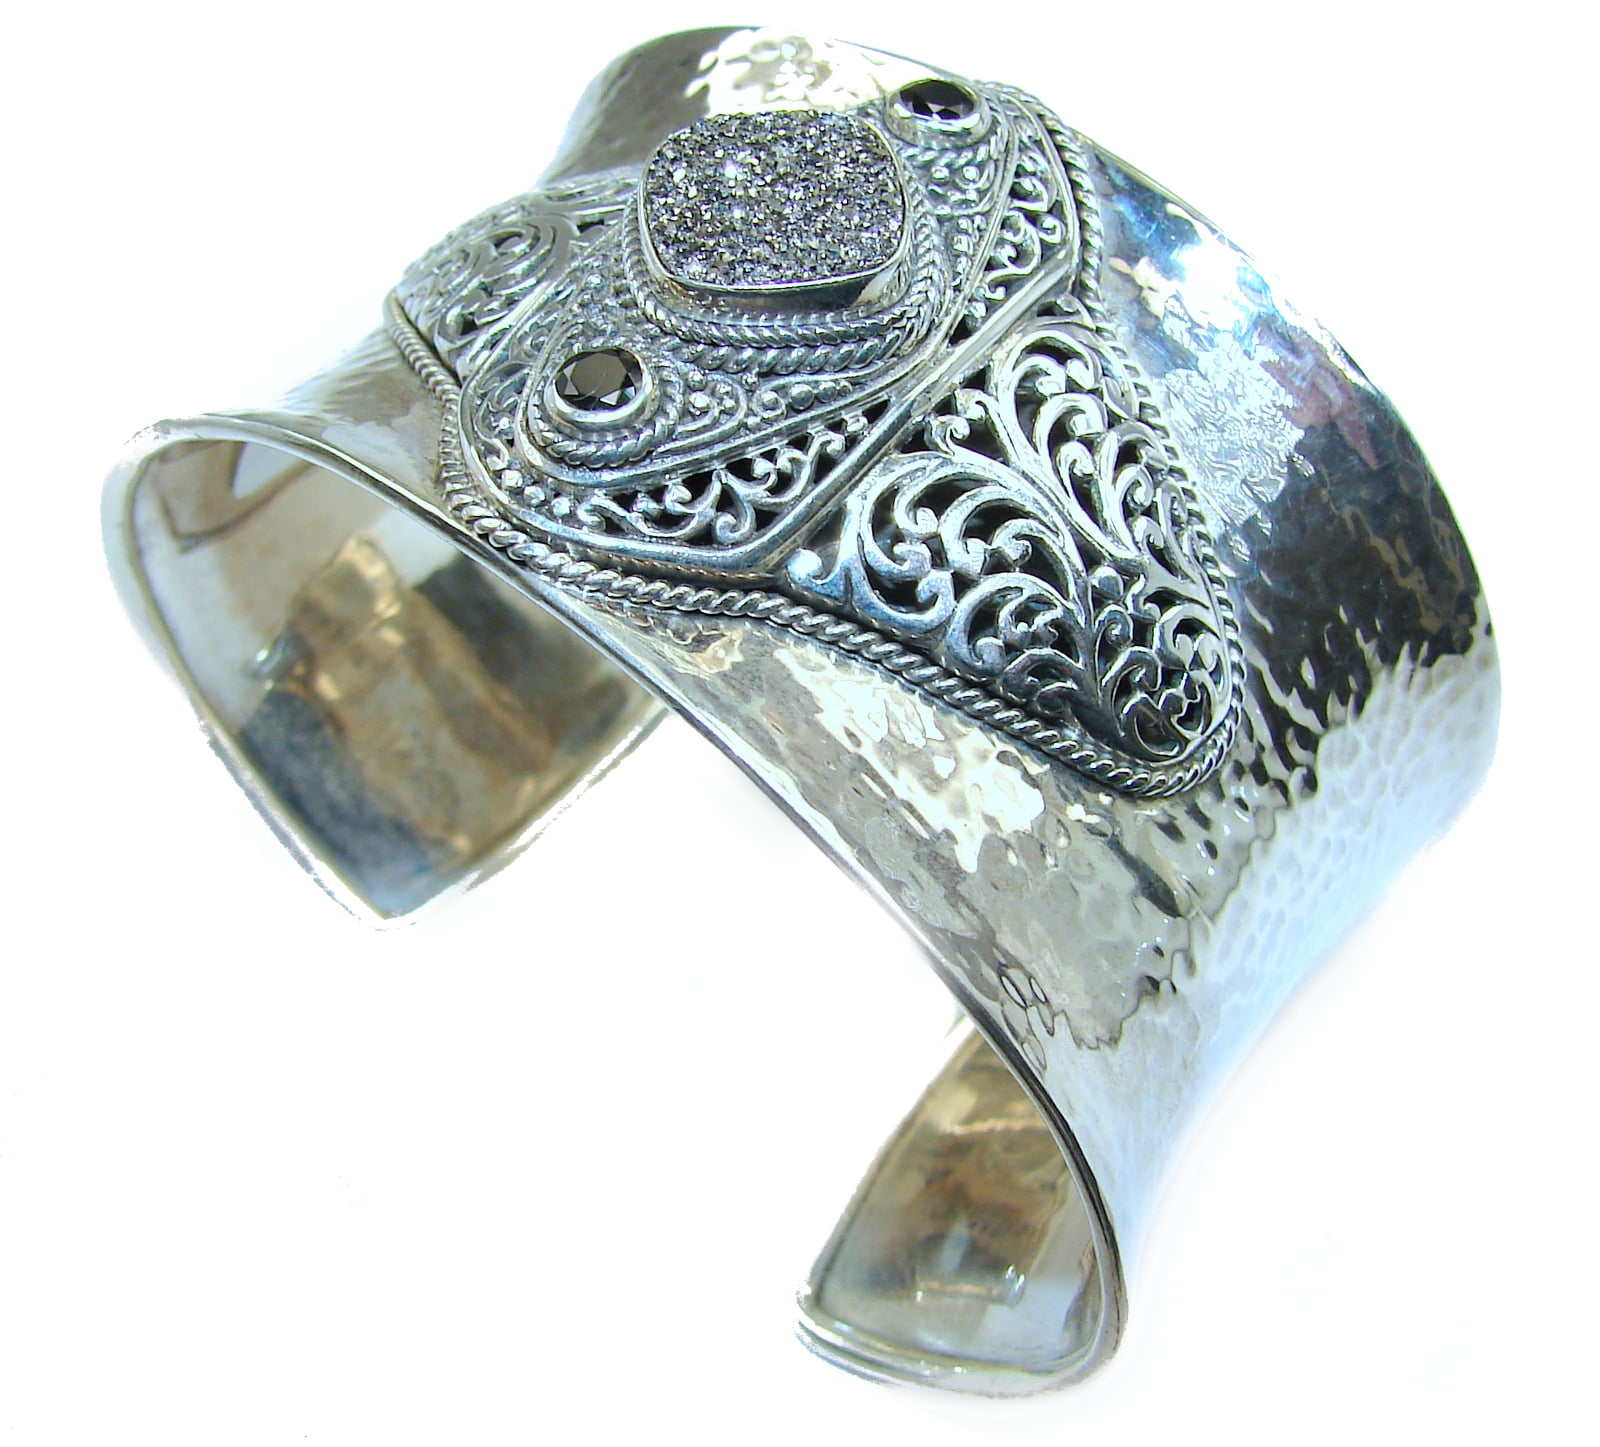 Handmade Solid Sterling Silver .925 Balinese Snake Design Band Ring,Size 7 7.5 